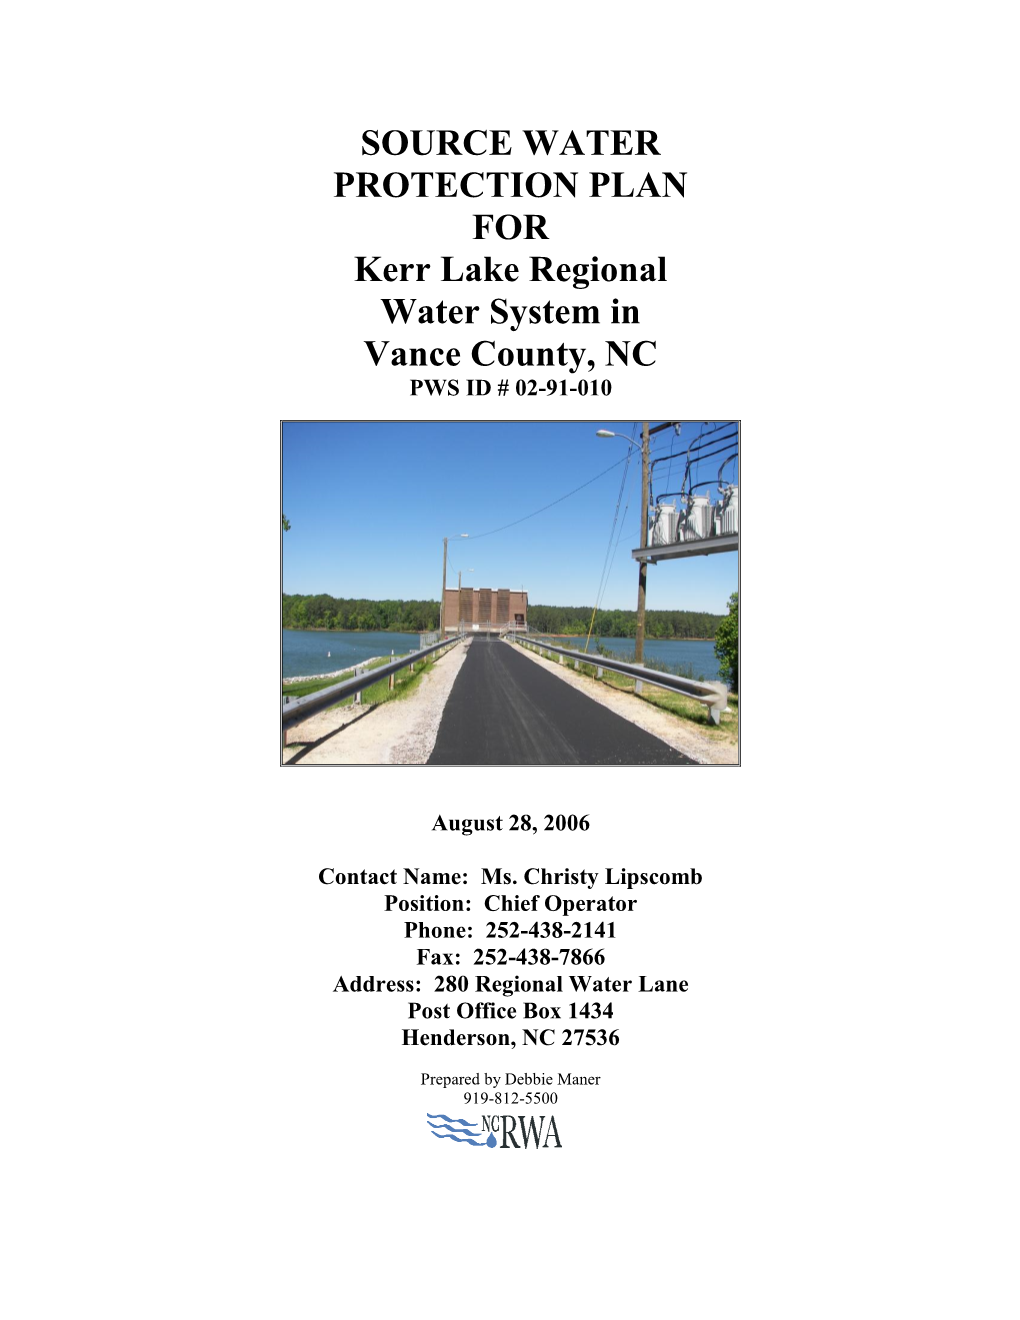 SOURCE WATER PROTECTION PLAN for Kerr Lake Regional Water System in Vance County, NC PWS ID # 02-91-010